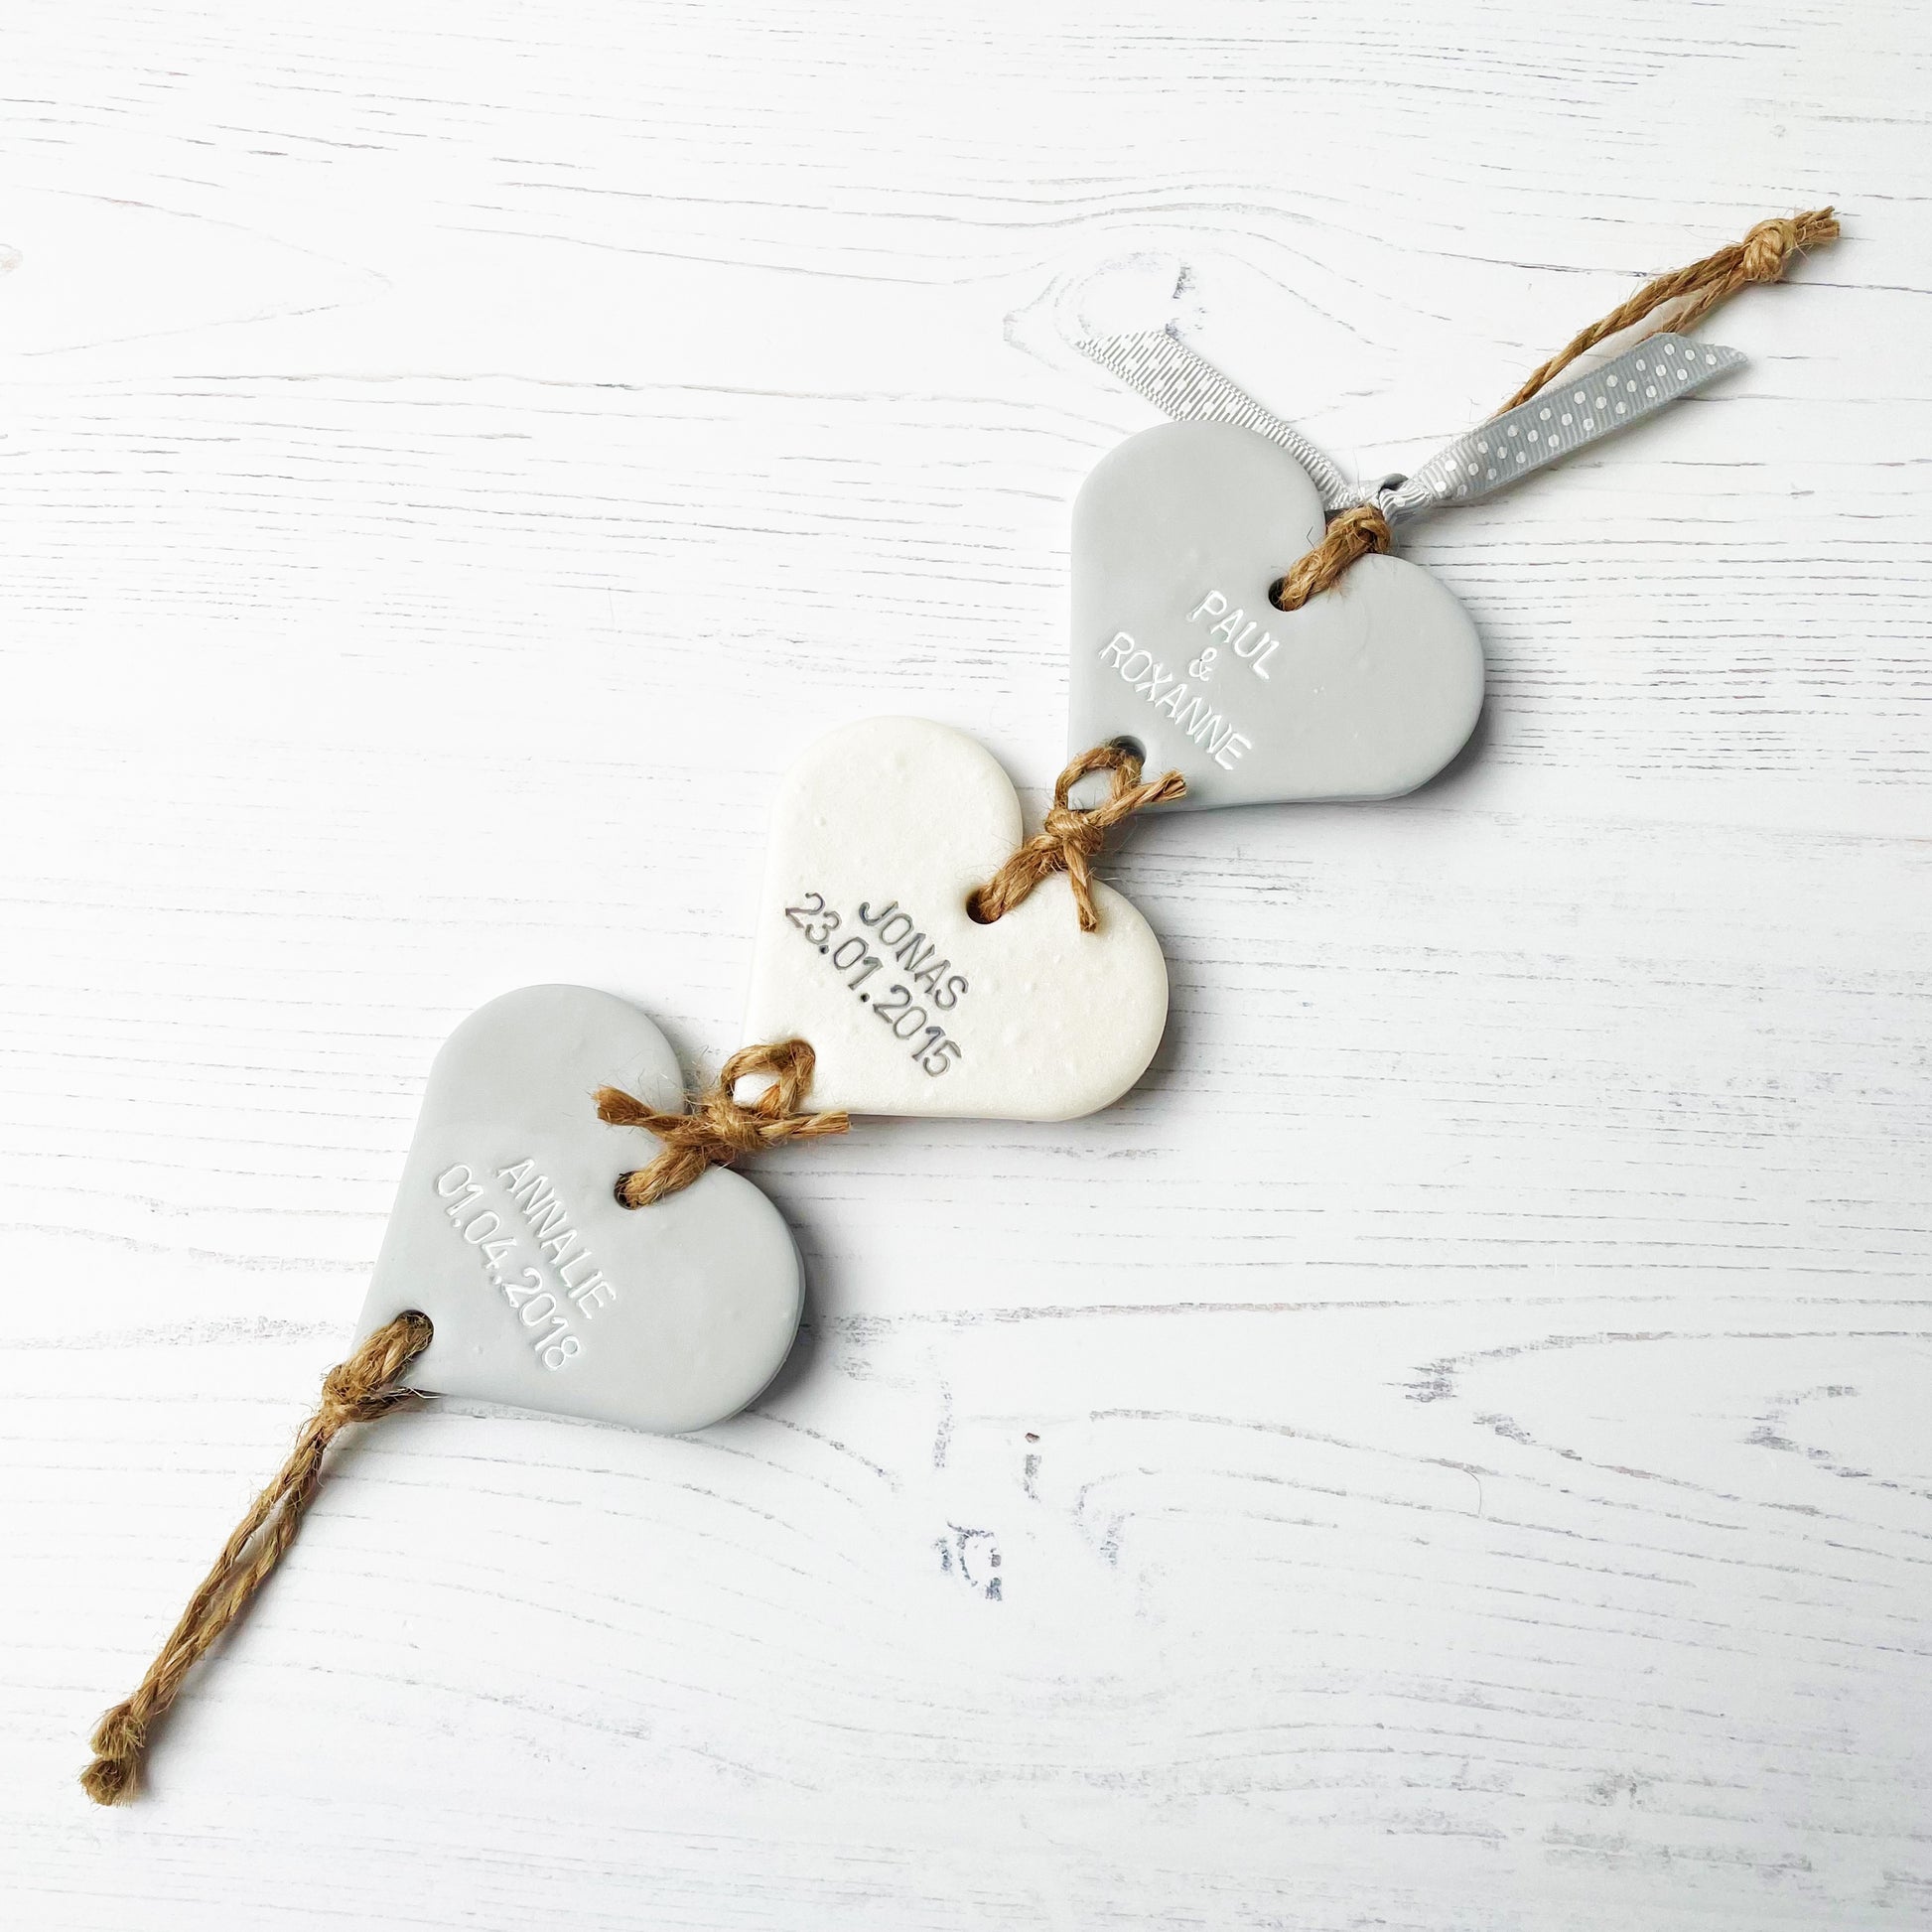 Personalised keepsake gift, hanging hearts engraved with family